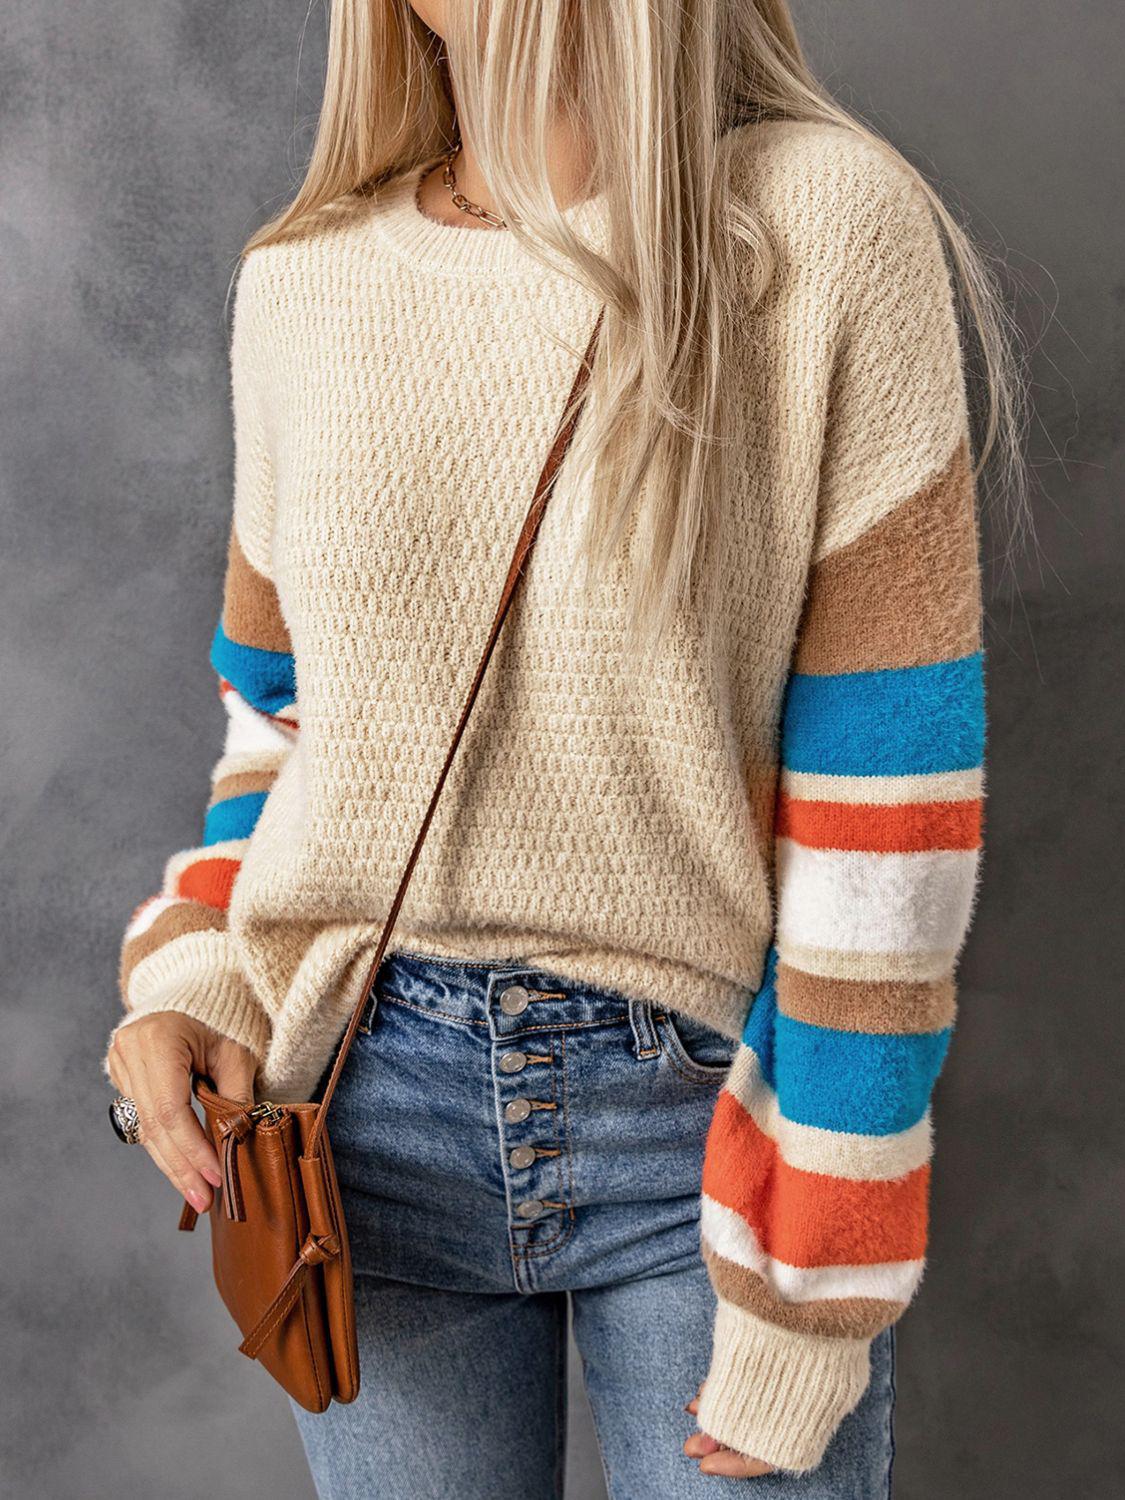 Striped Dropped Shoulder Crewneck Ribbed Trim Sweater BLUE ZONE PLANET